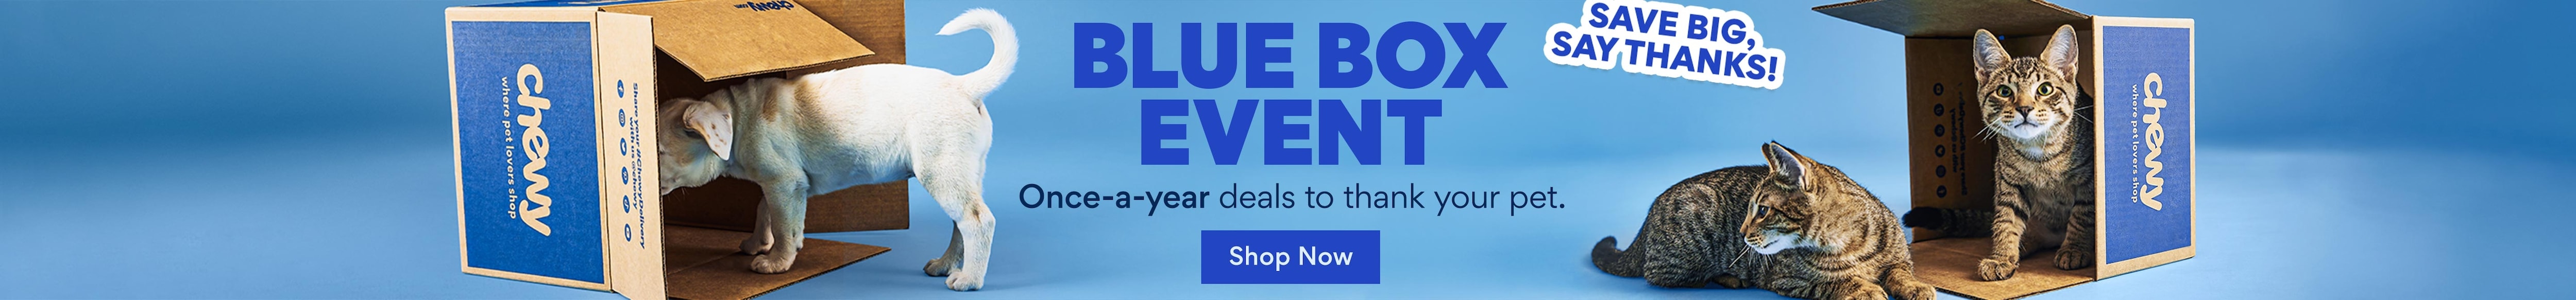 Blue Box Event. Once-a-year deals to thank your pet. Shop Now.